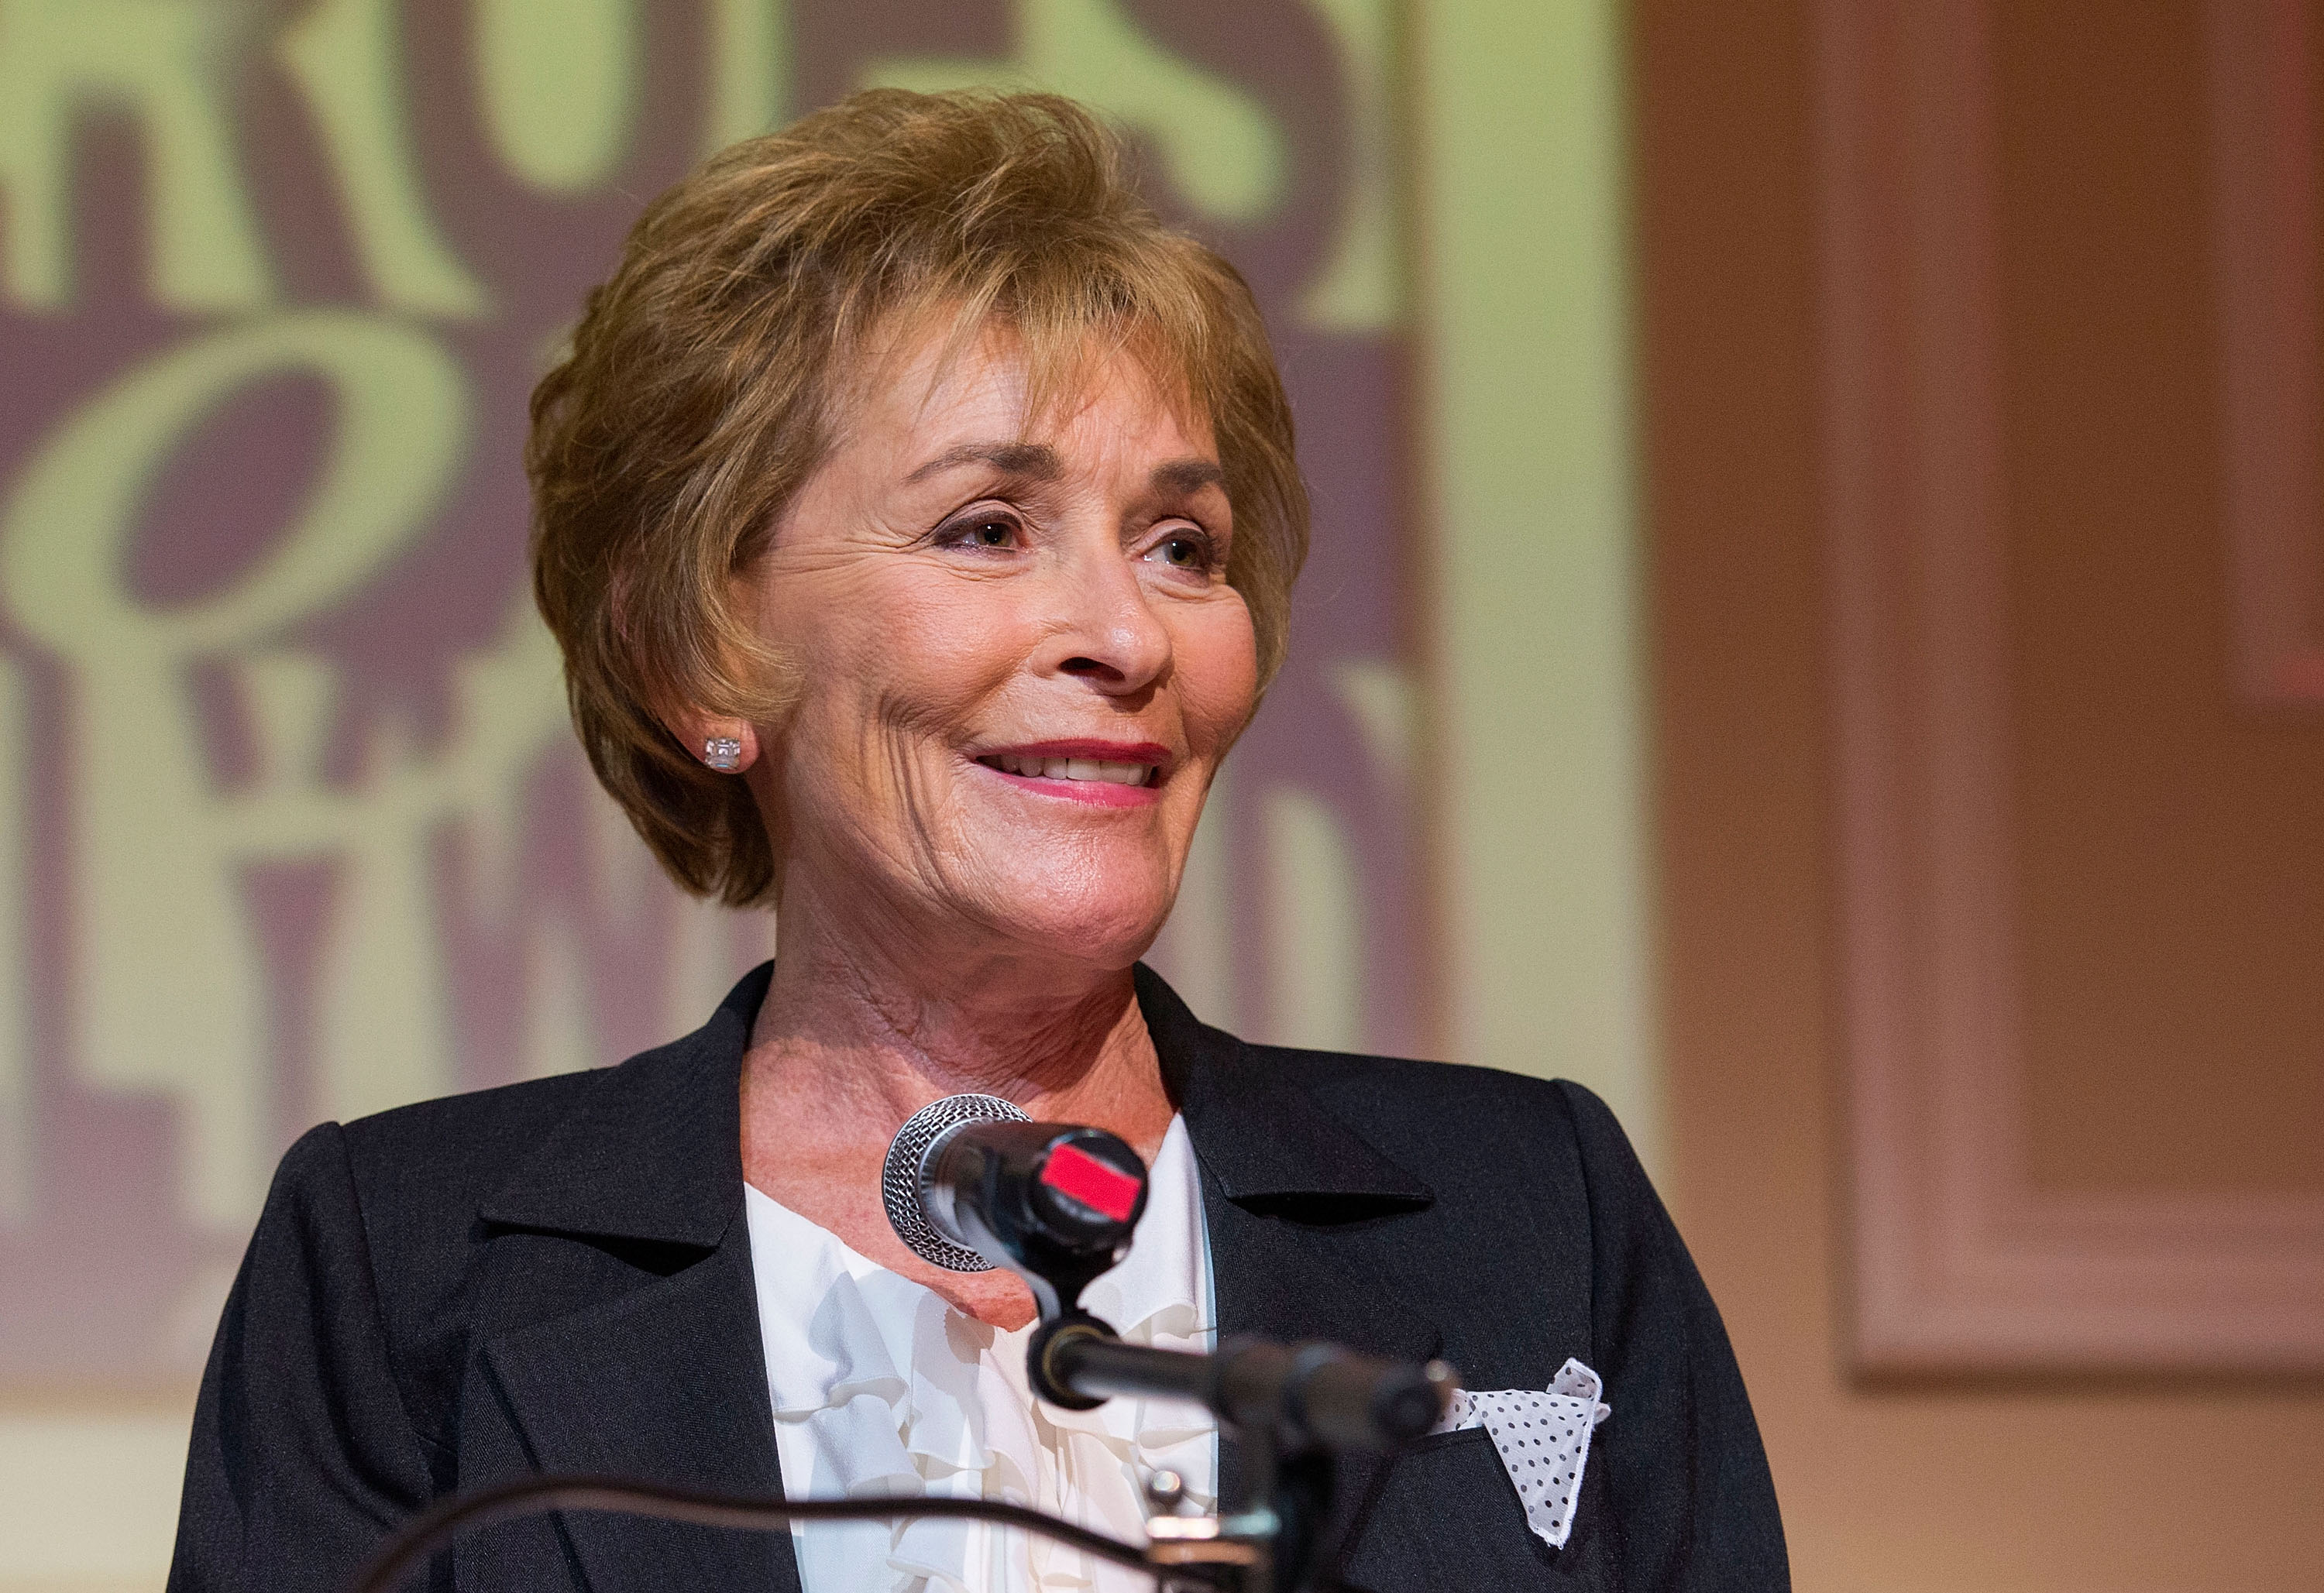 Judge Judy on June 5, 2014 in Hollywood, California | Source: Getty Images